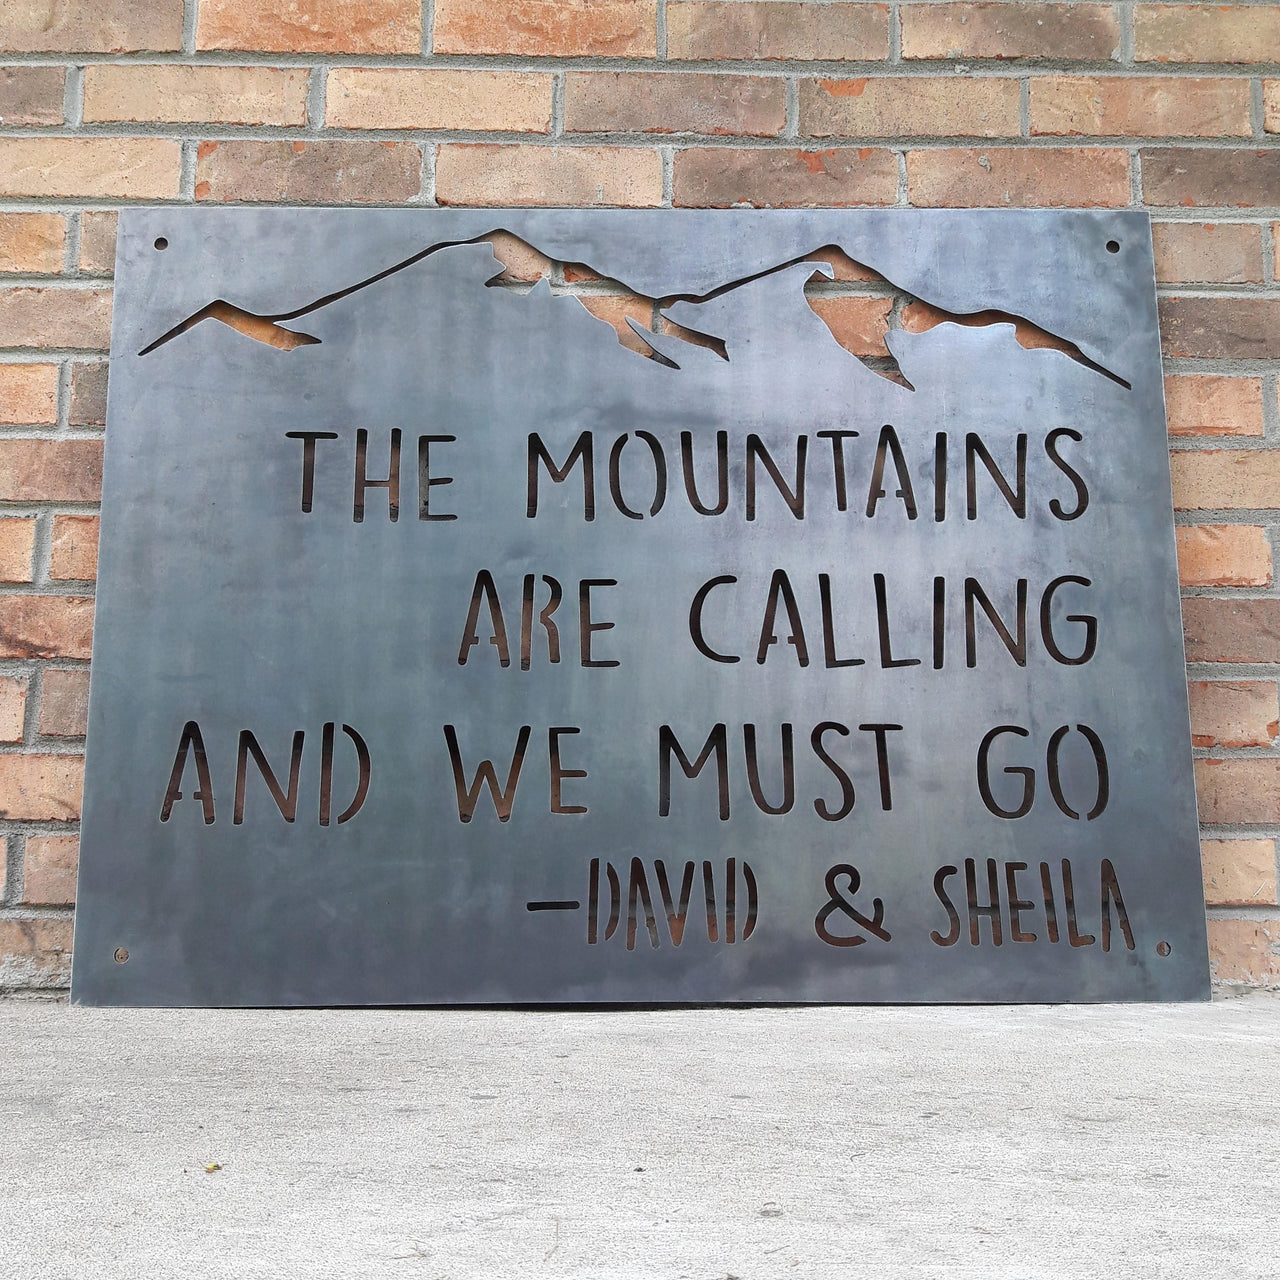 This Metal sign has a mountain range across the top and features a quote by John Muir. The sign reads, "The Mountains Are Calling And I must Go, David and Sheila".